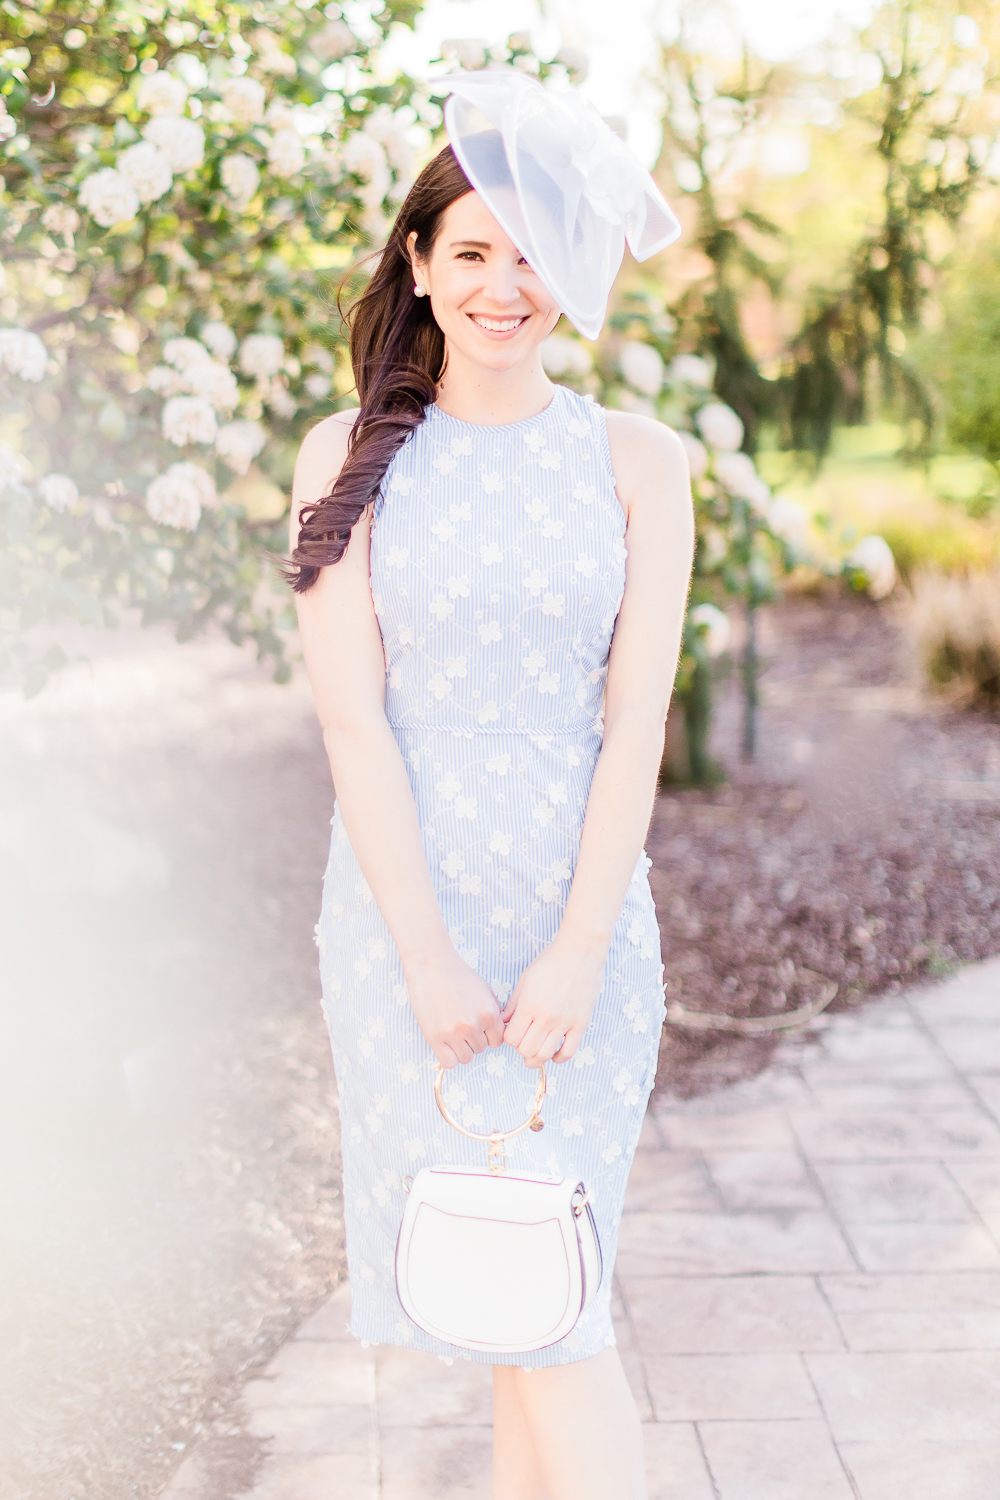 Maggy London Cecilia Midi Dress styled with a white fascinator headband, white Chloe Nile dupe bag, and espadrille slide sandals, Derby Day Style Guide: 3 Head-to-Toe Kentucky Derby Outfit Ideas by affordable fashion blogger Stephanie Ziajka from Diary of a Debutante